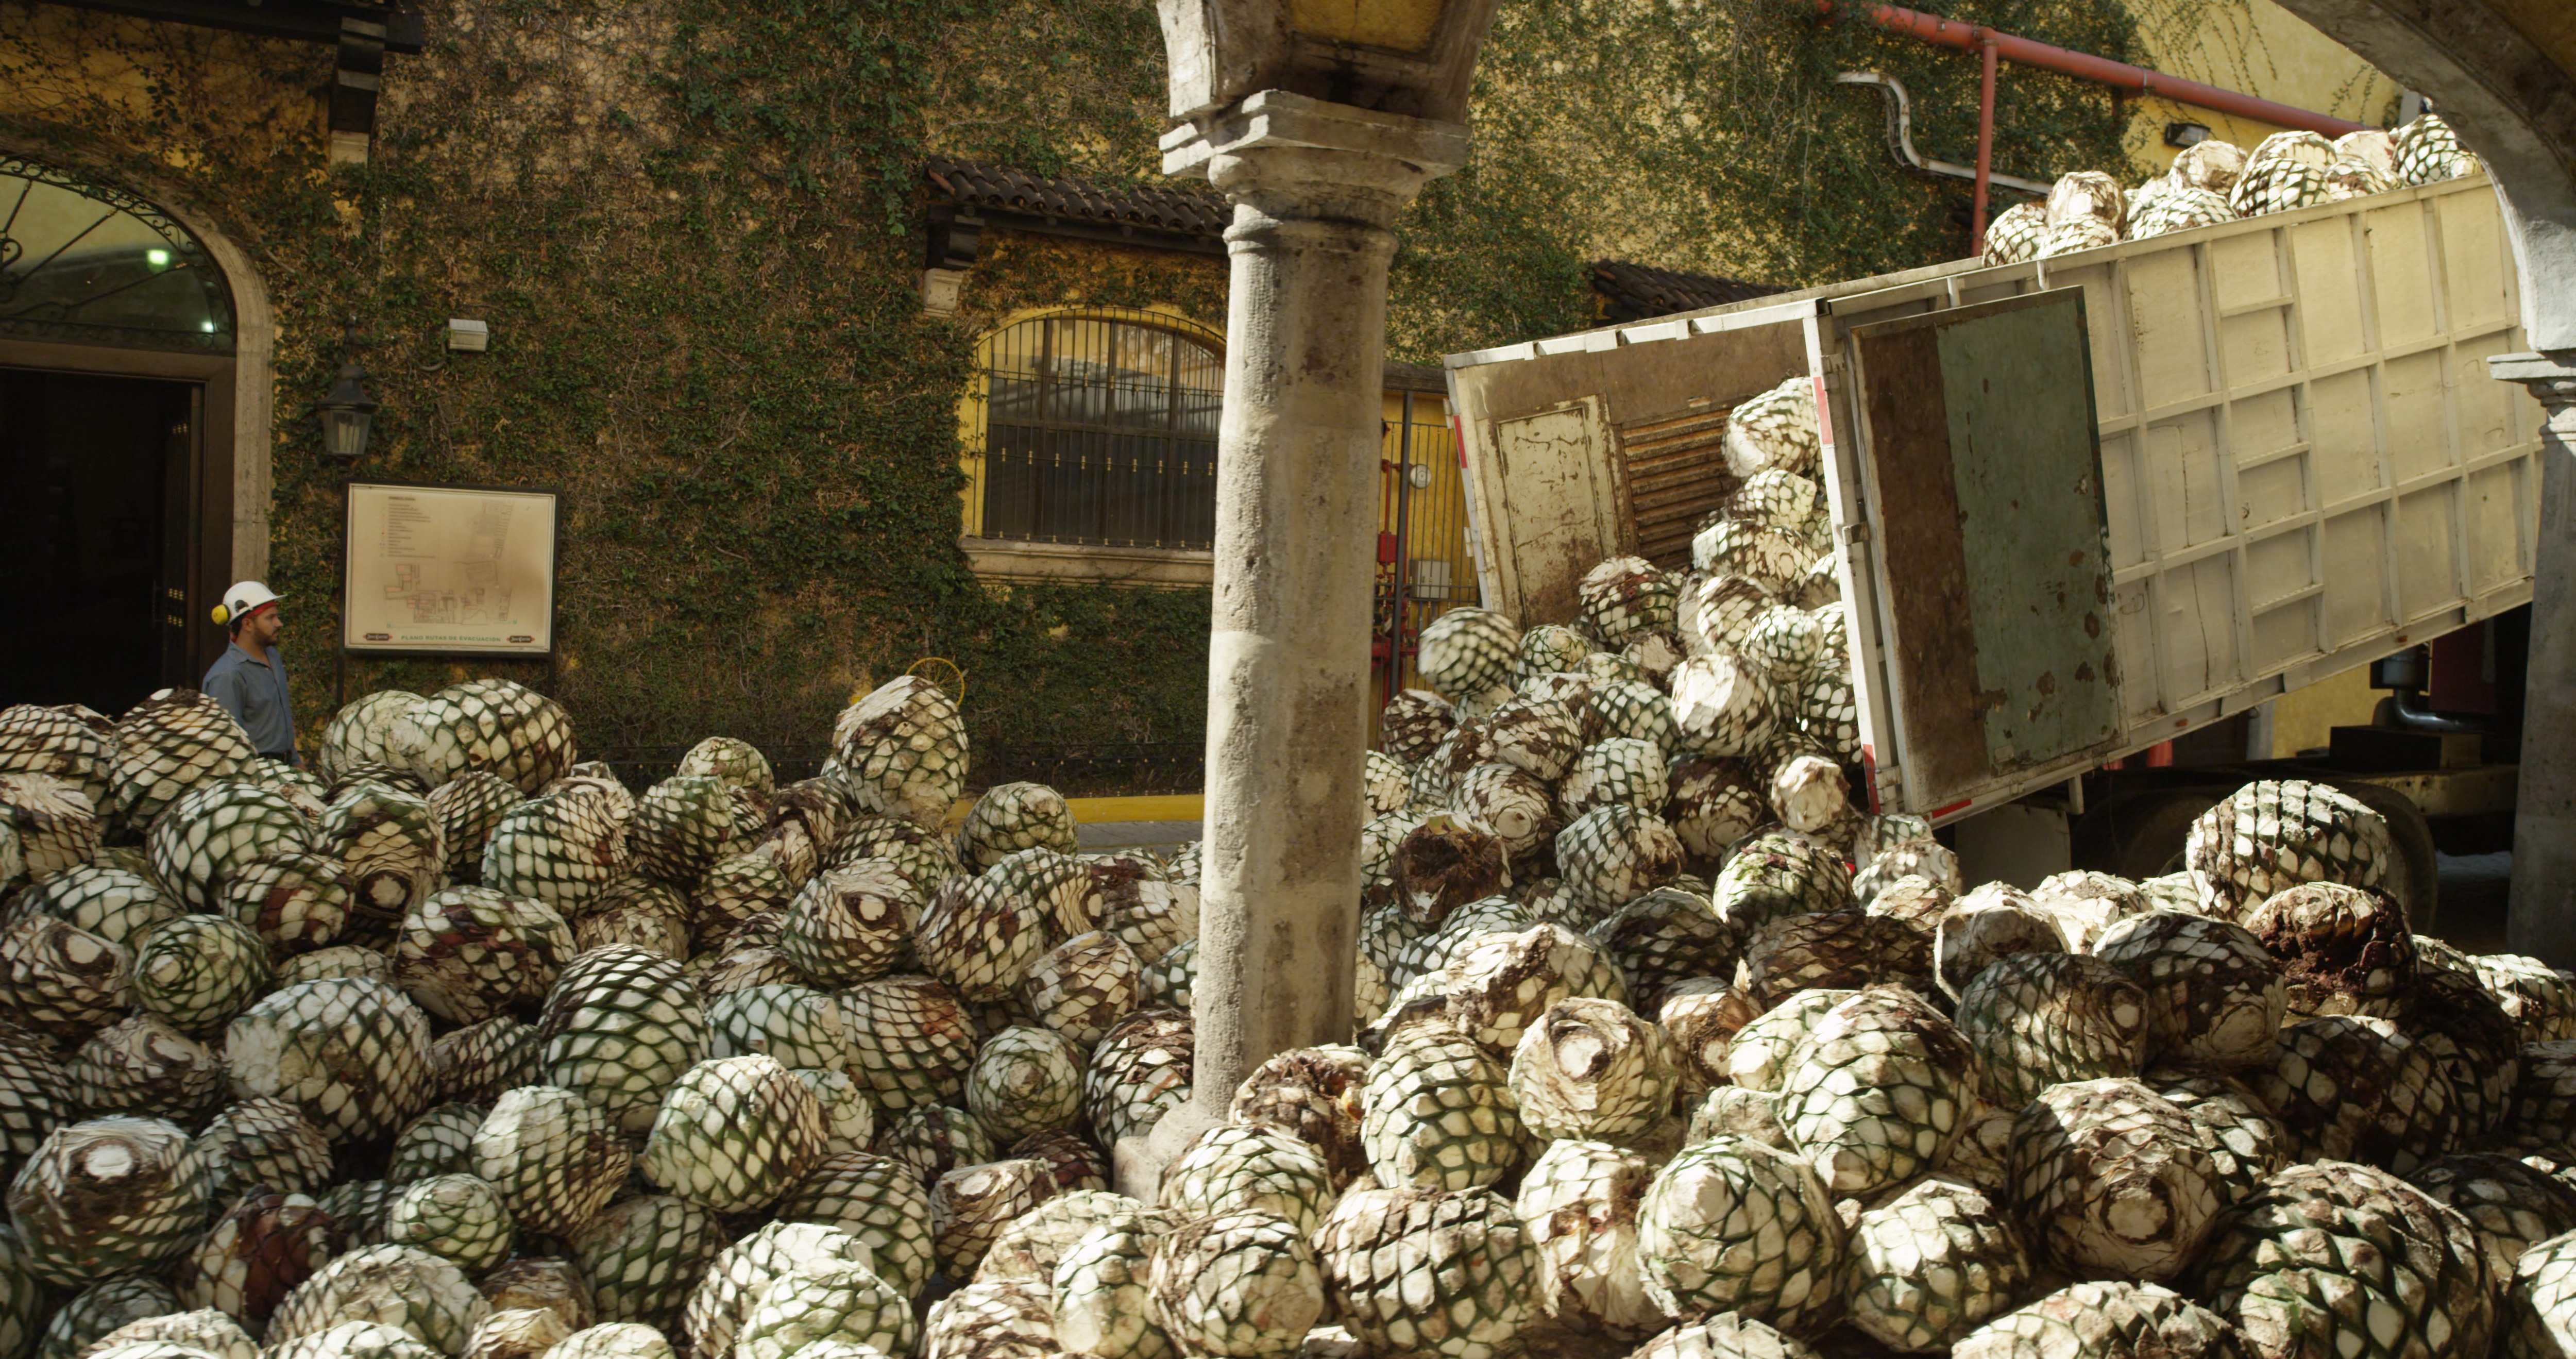 Ford, Jose Cuervo Team Up to Make Car Parts from Agave